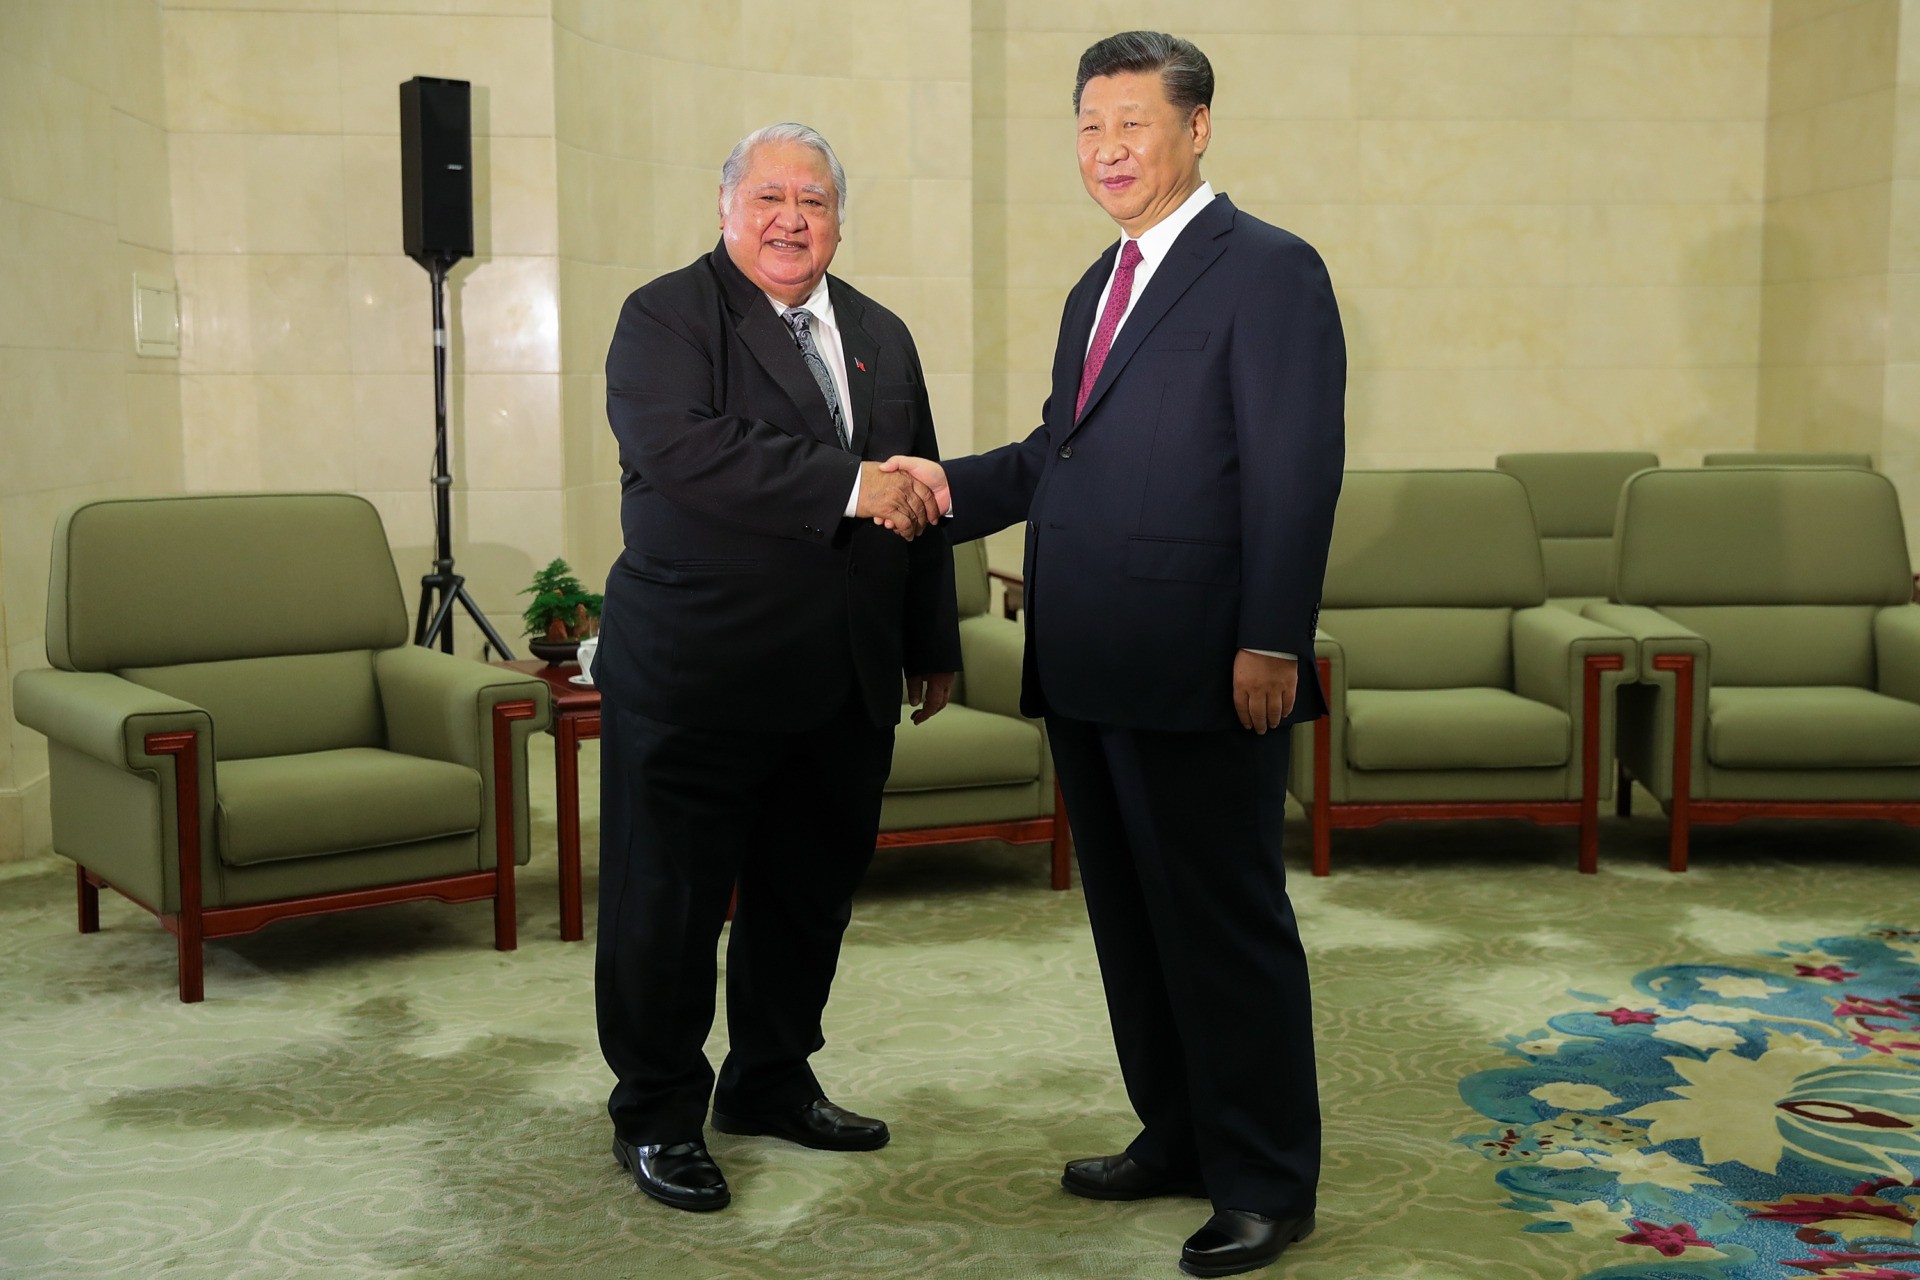 BEIJING, CHINA - SEPTEMBER 18: Samoa Prime Minister Tuilaepa Lupesoliai Sailele Malielegaoi (L) shakes hands with Chinese President Xi Jinping (R) at The Great Hall Of The People on September 18, 2018 in Beijing, China. (Photo by Lintao Zhang/Pool/Getty Images)